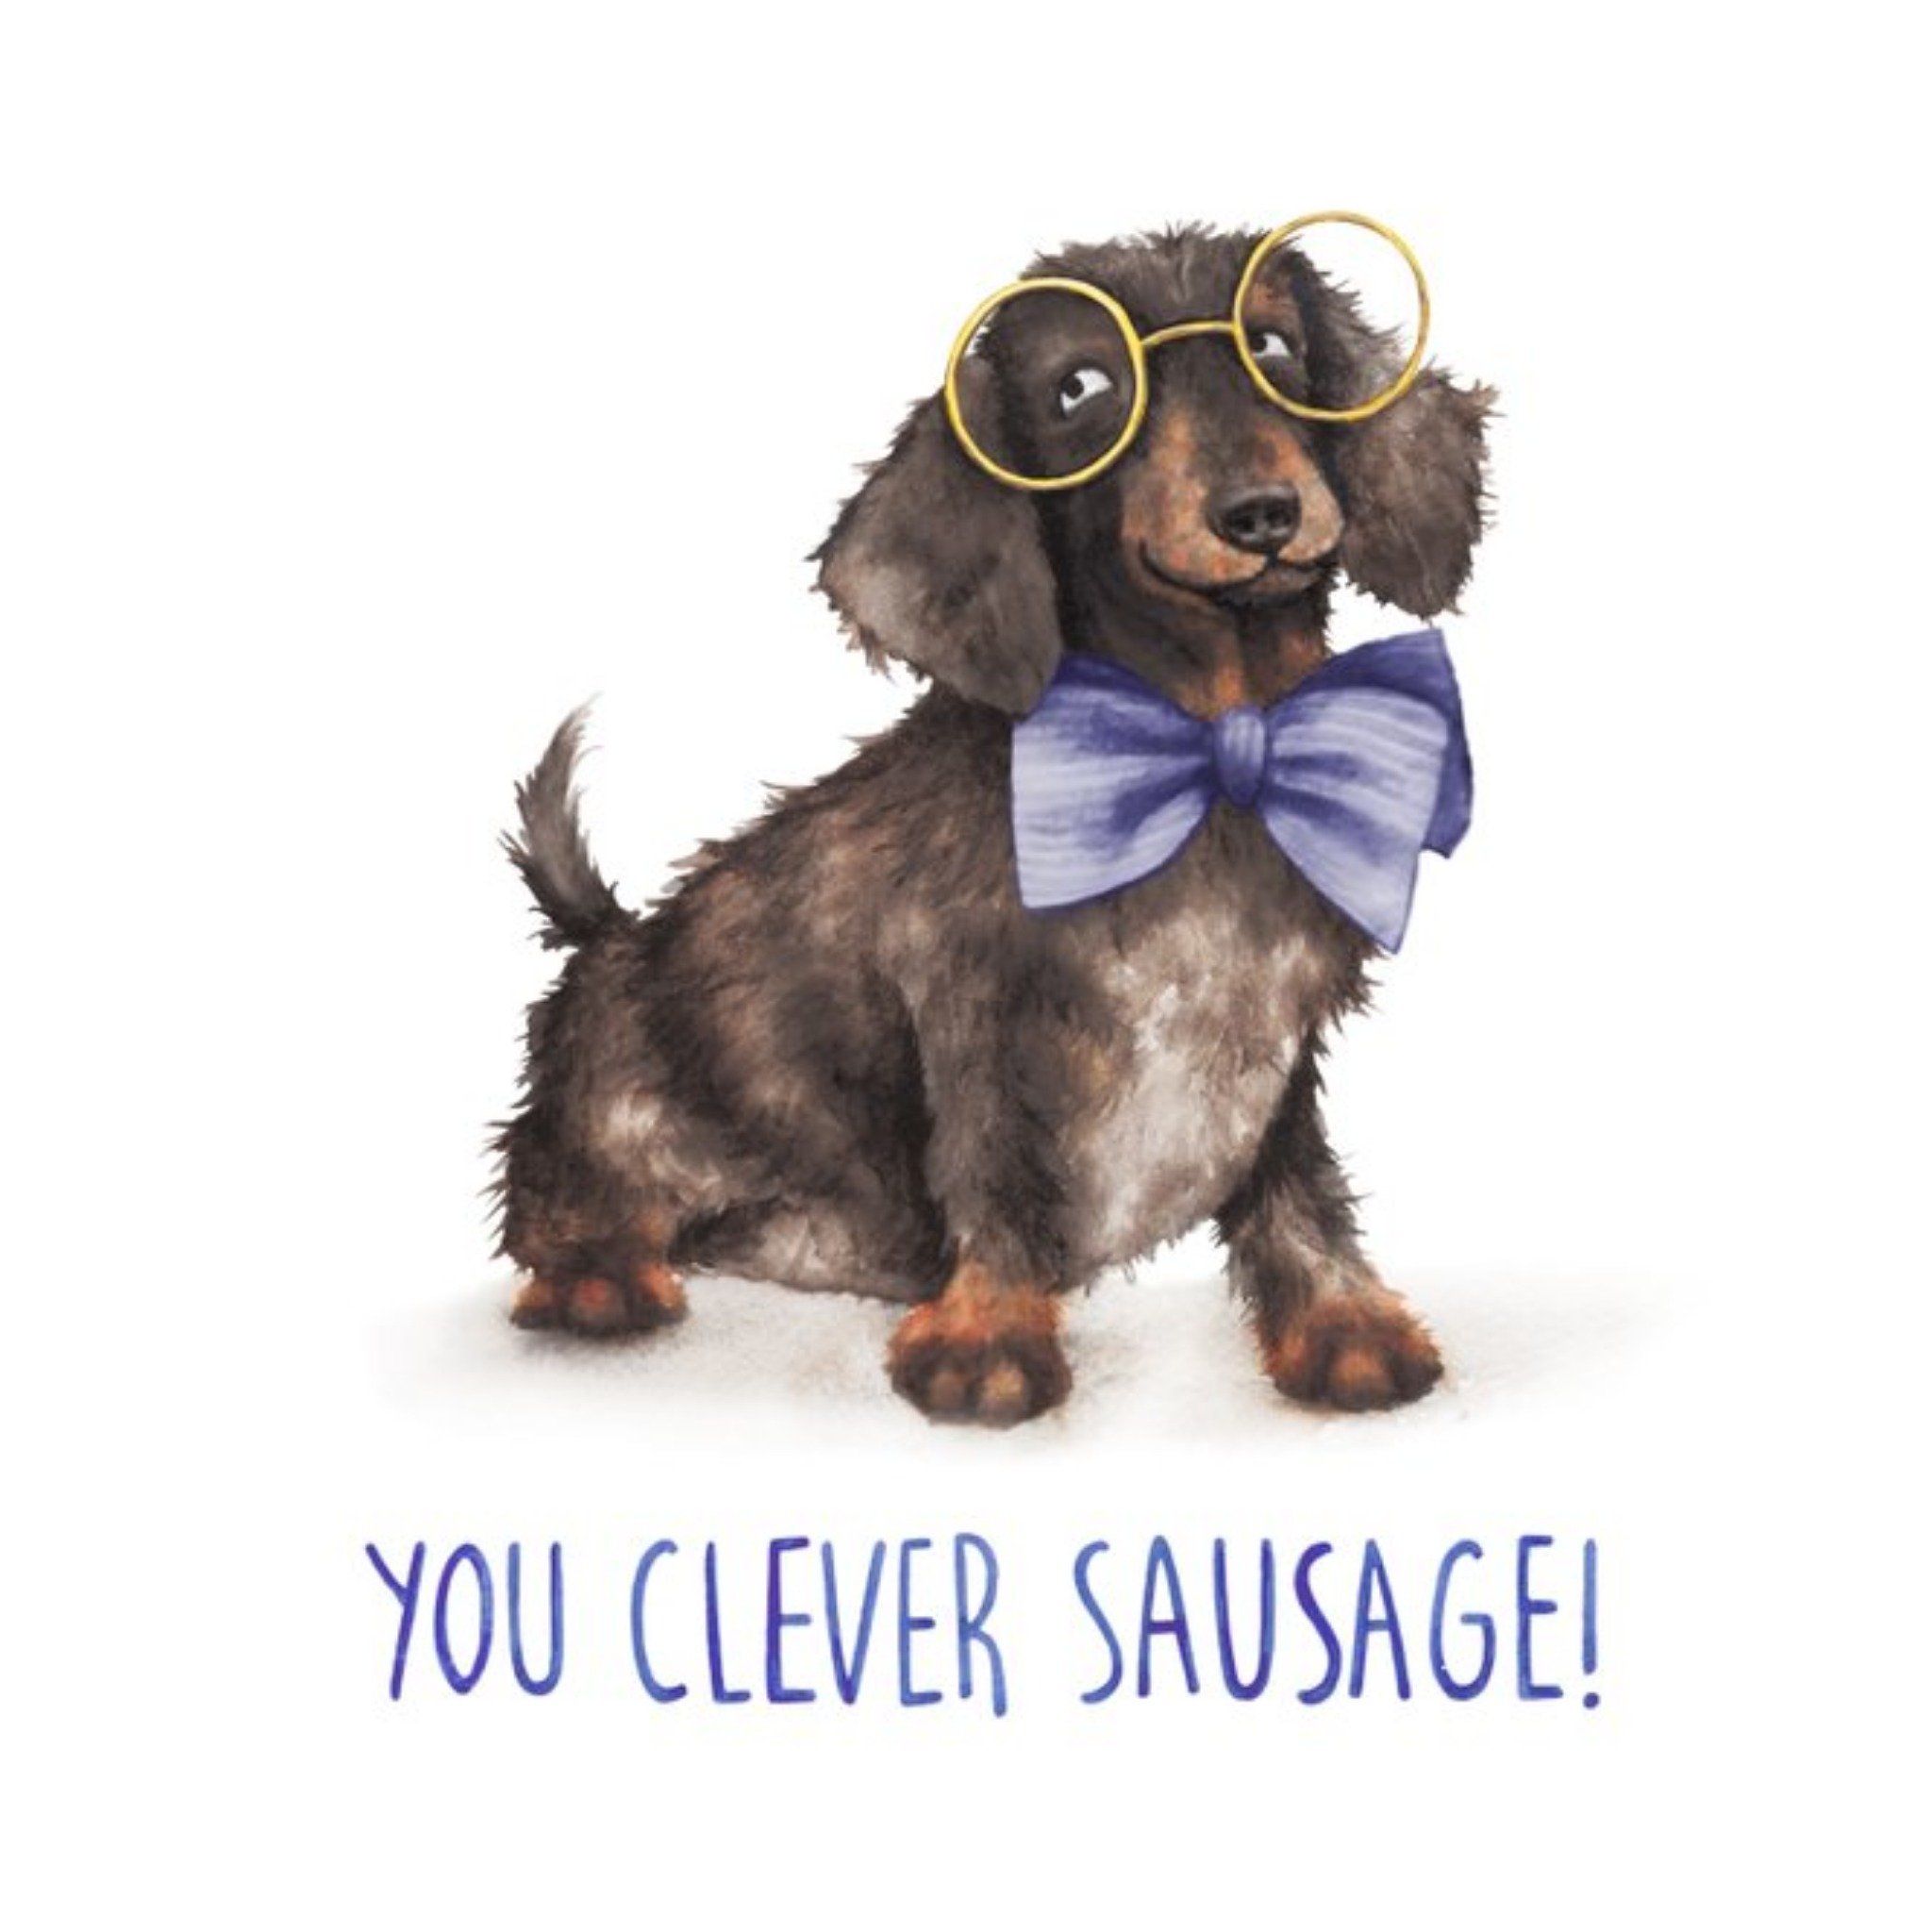 Moonpig Dog You Clever Sausage Pun Card, Square